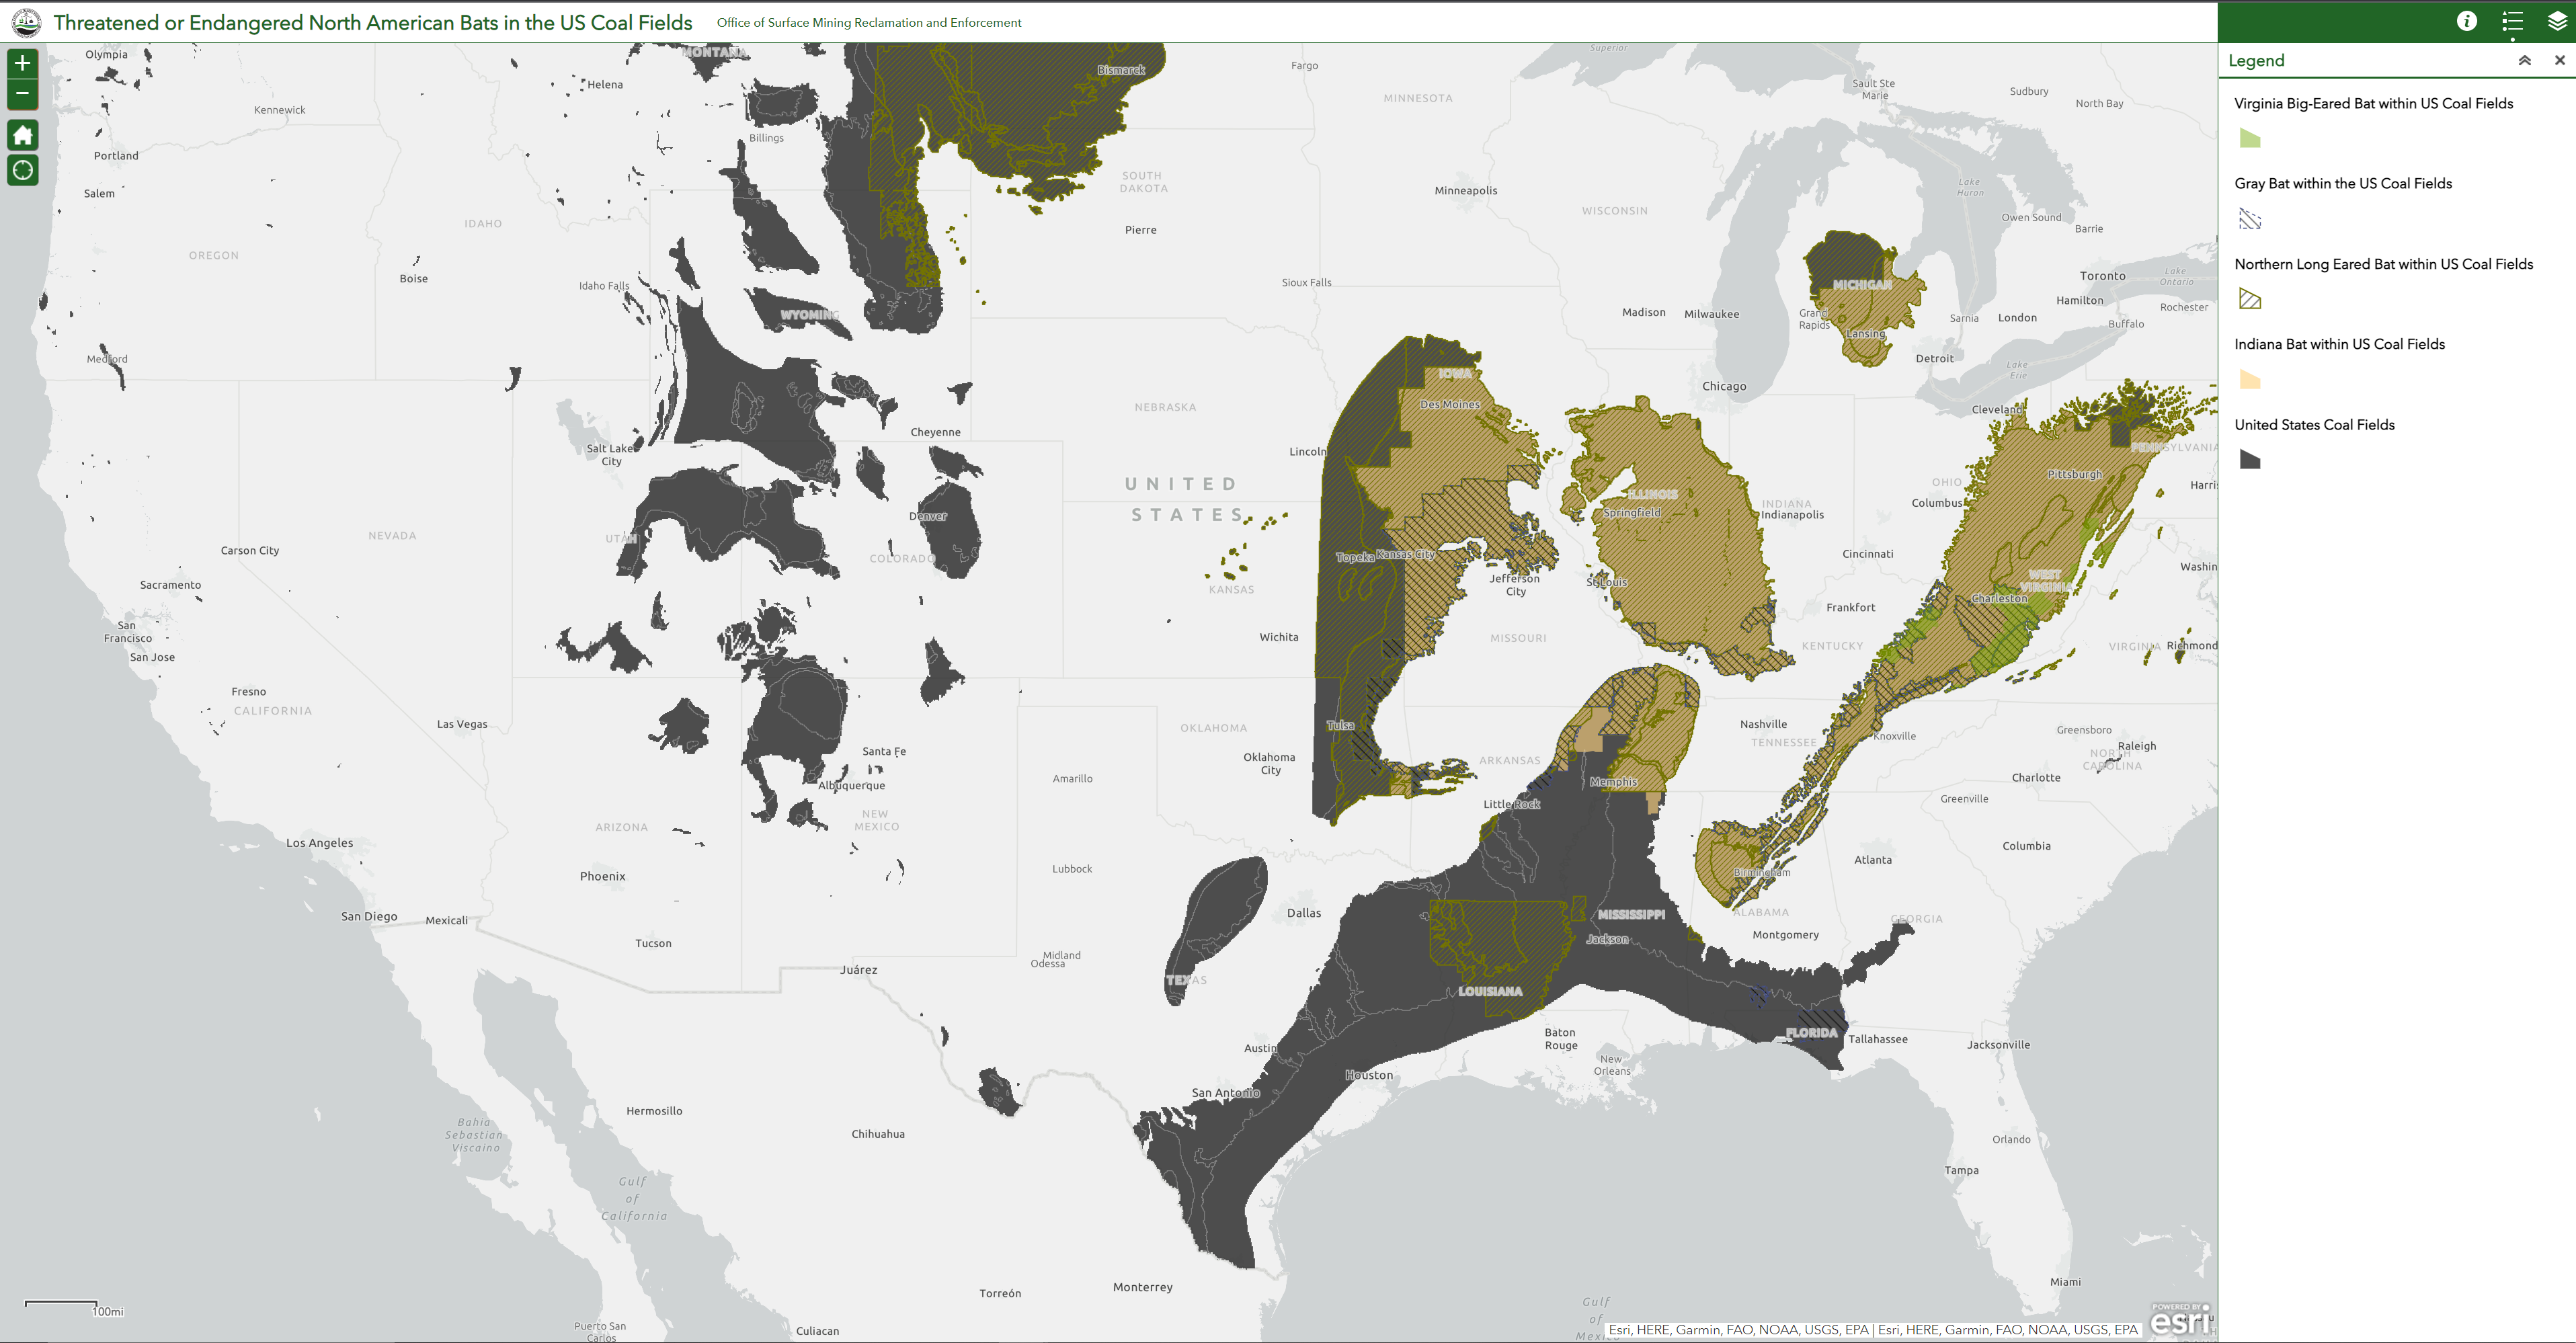 Map showing threatened and endangered bats in the U.S. coal fields with link to interactive map.